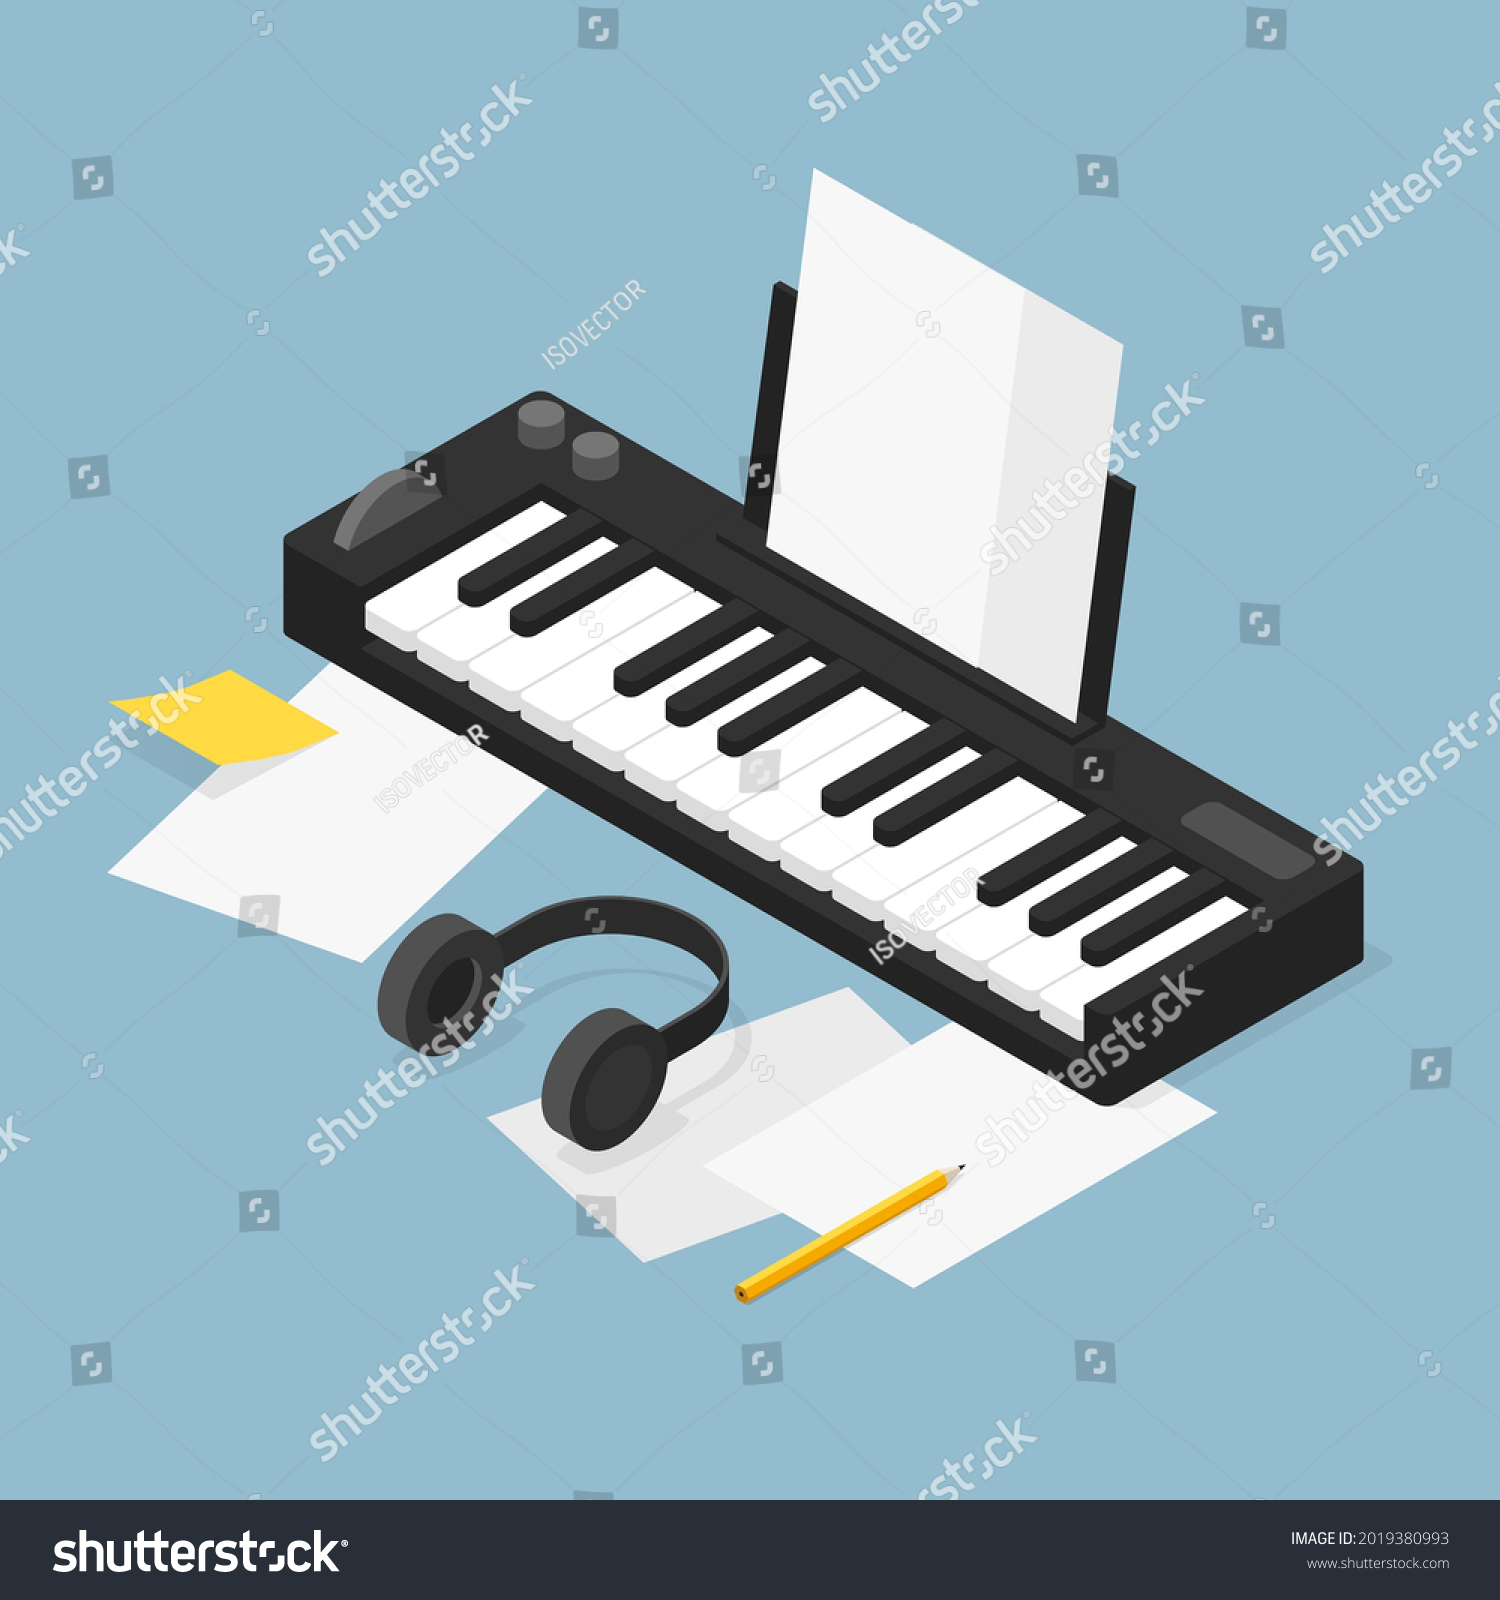 SVG of Vector isometric music production illustration. Music production equipment - piano with headphones and papers. Music composer concept. svg